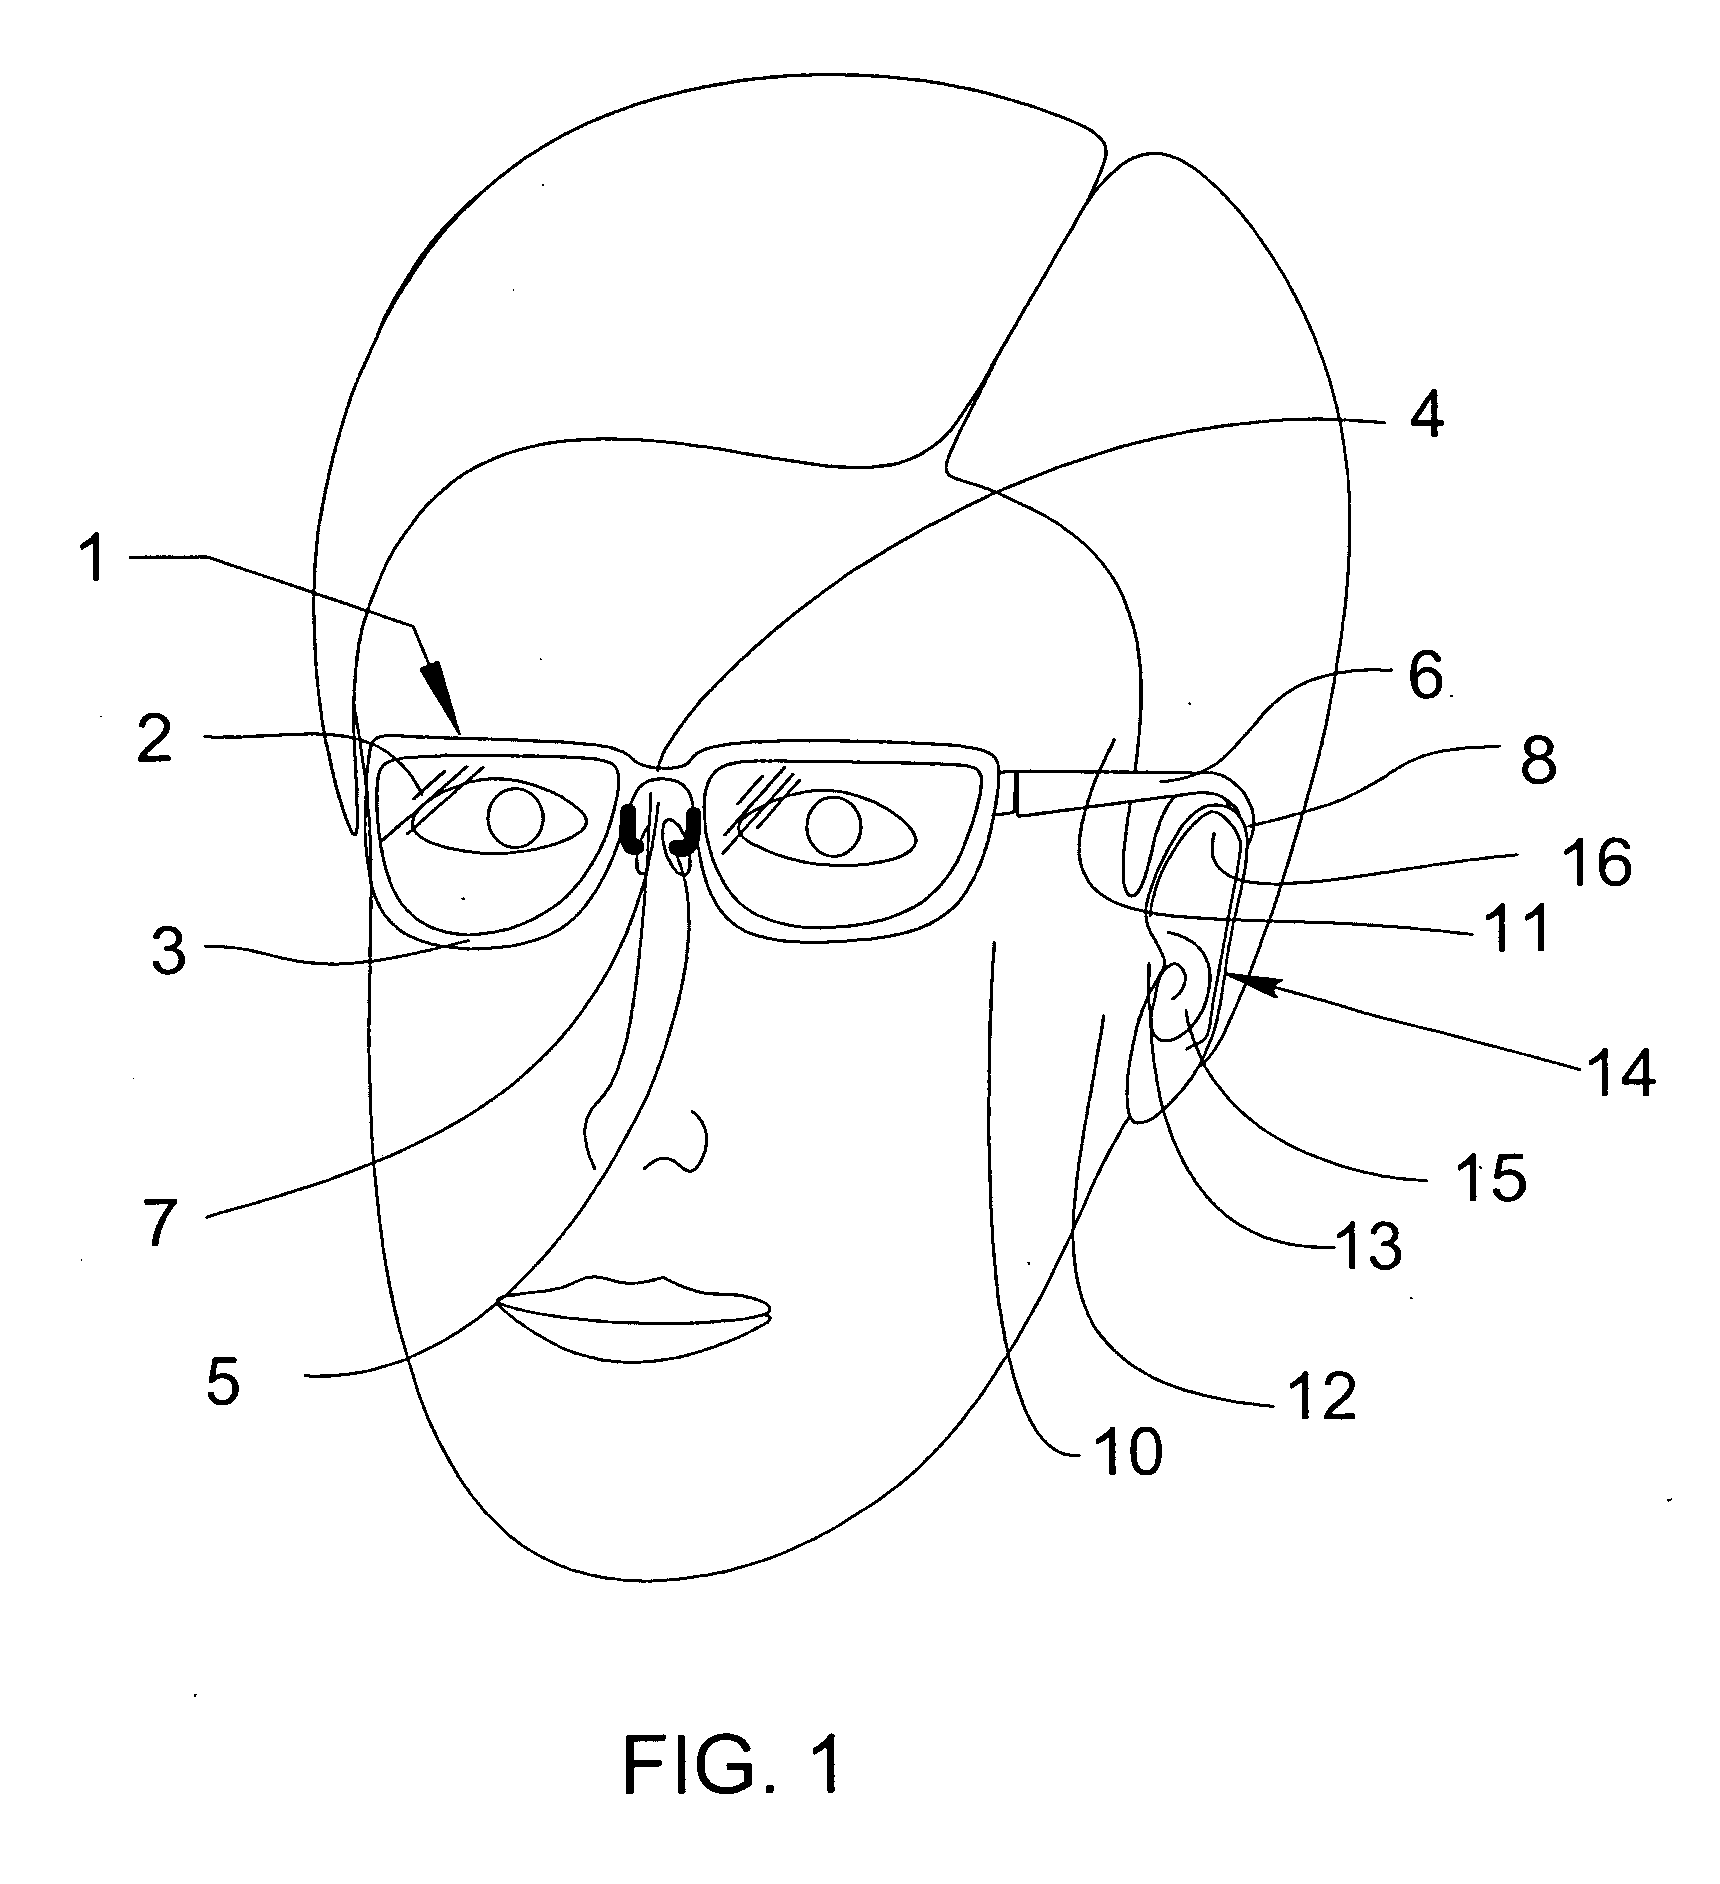 Eyeglasses with temple arm supports